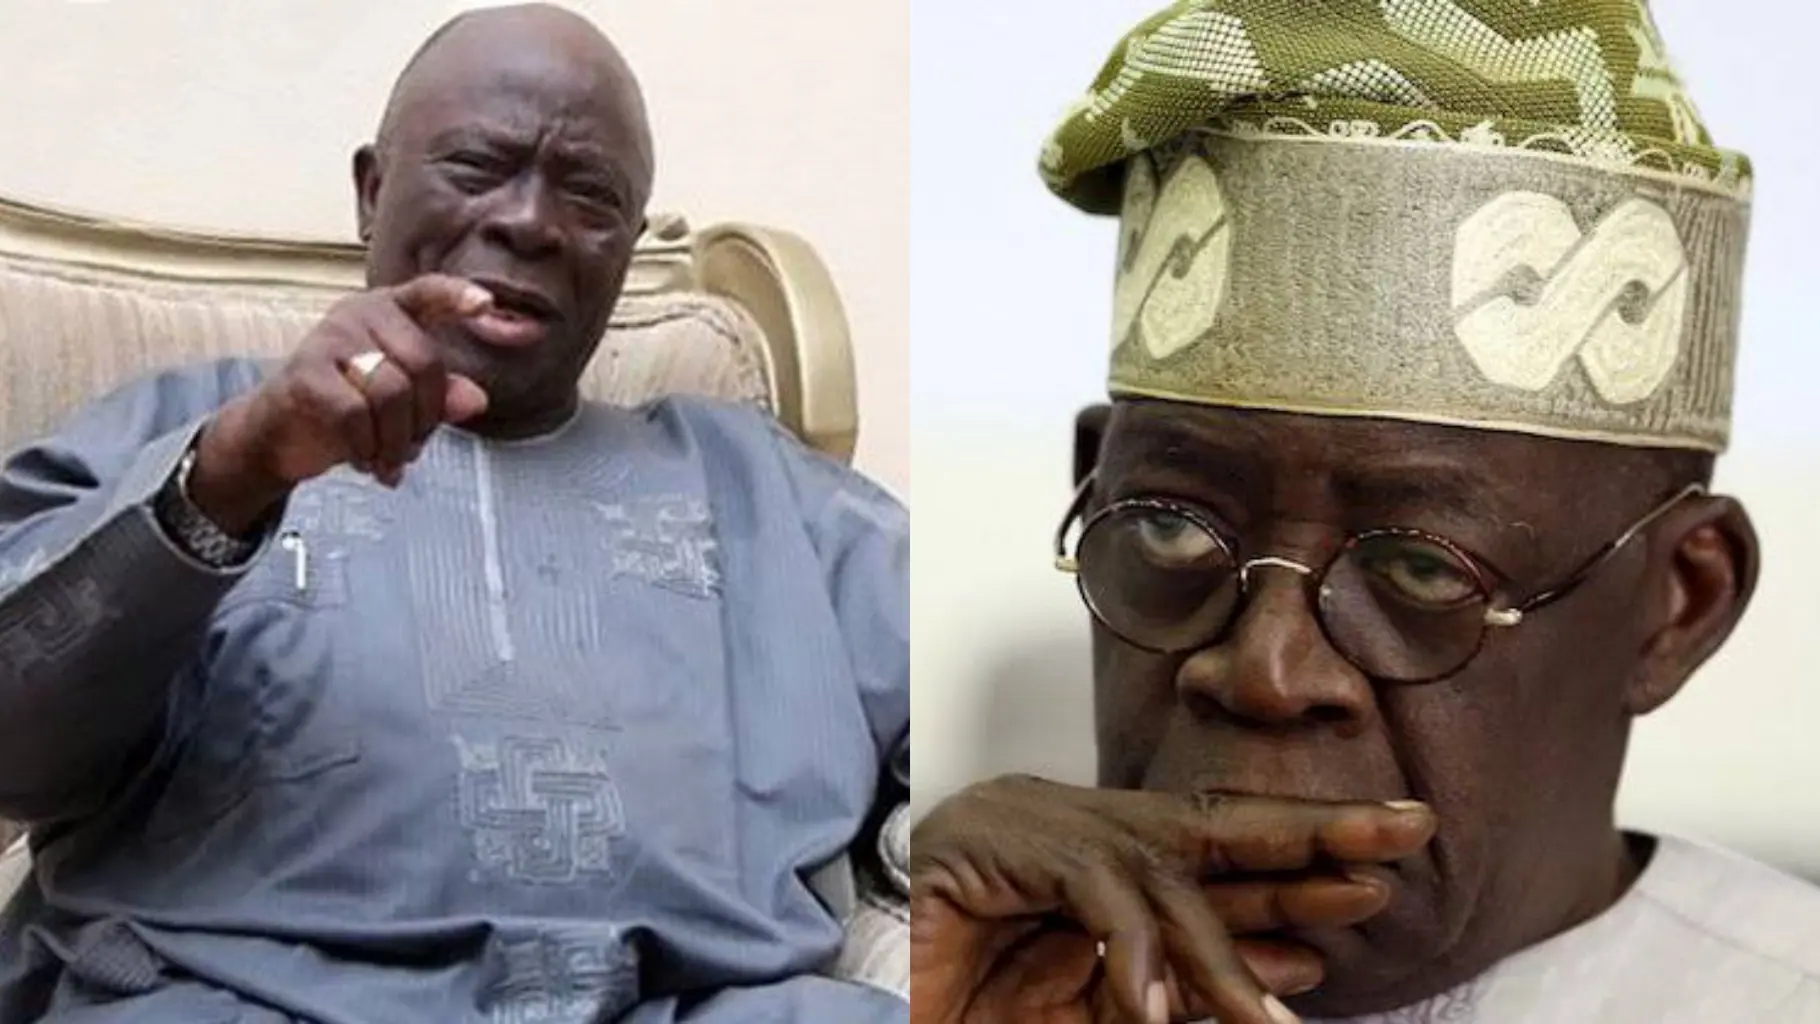 “Bola Tinubu is not from Lagos State”